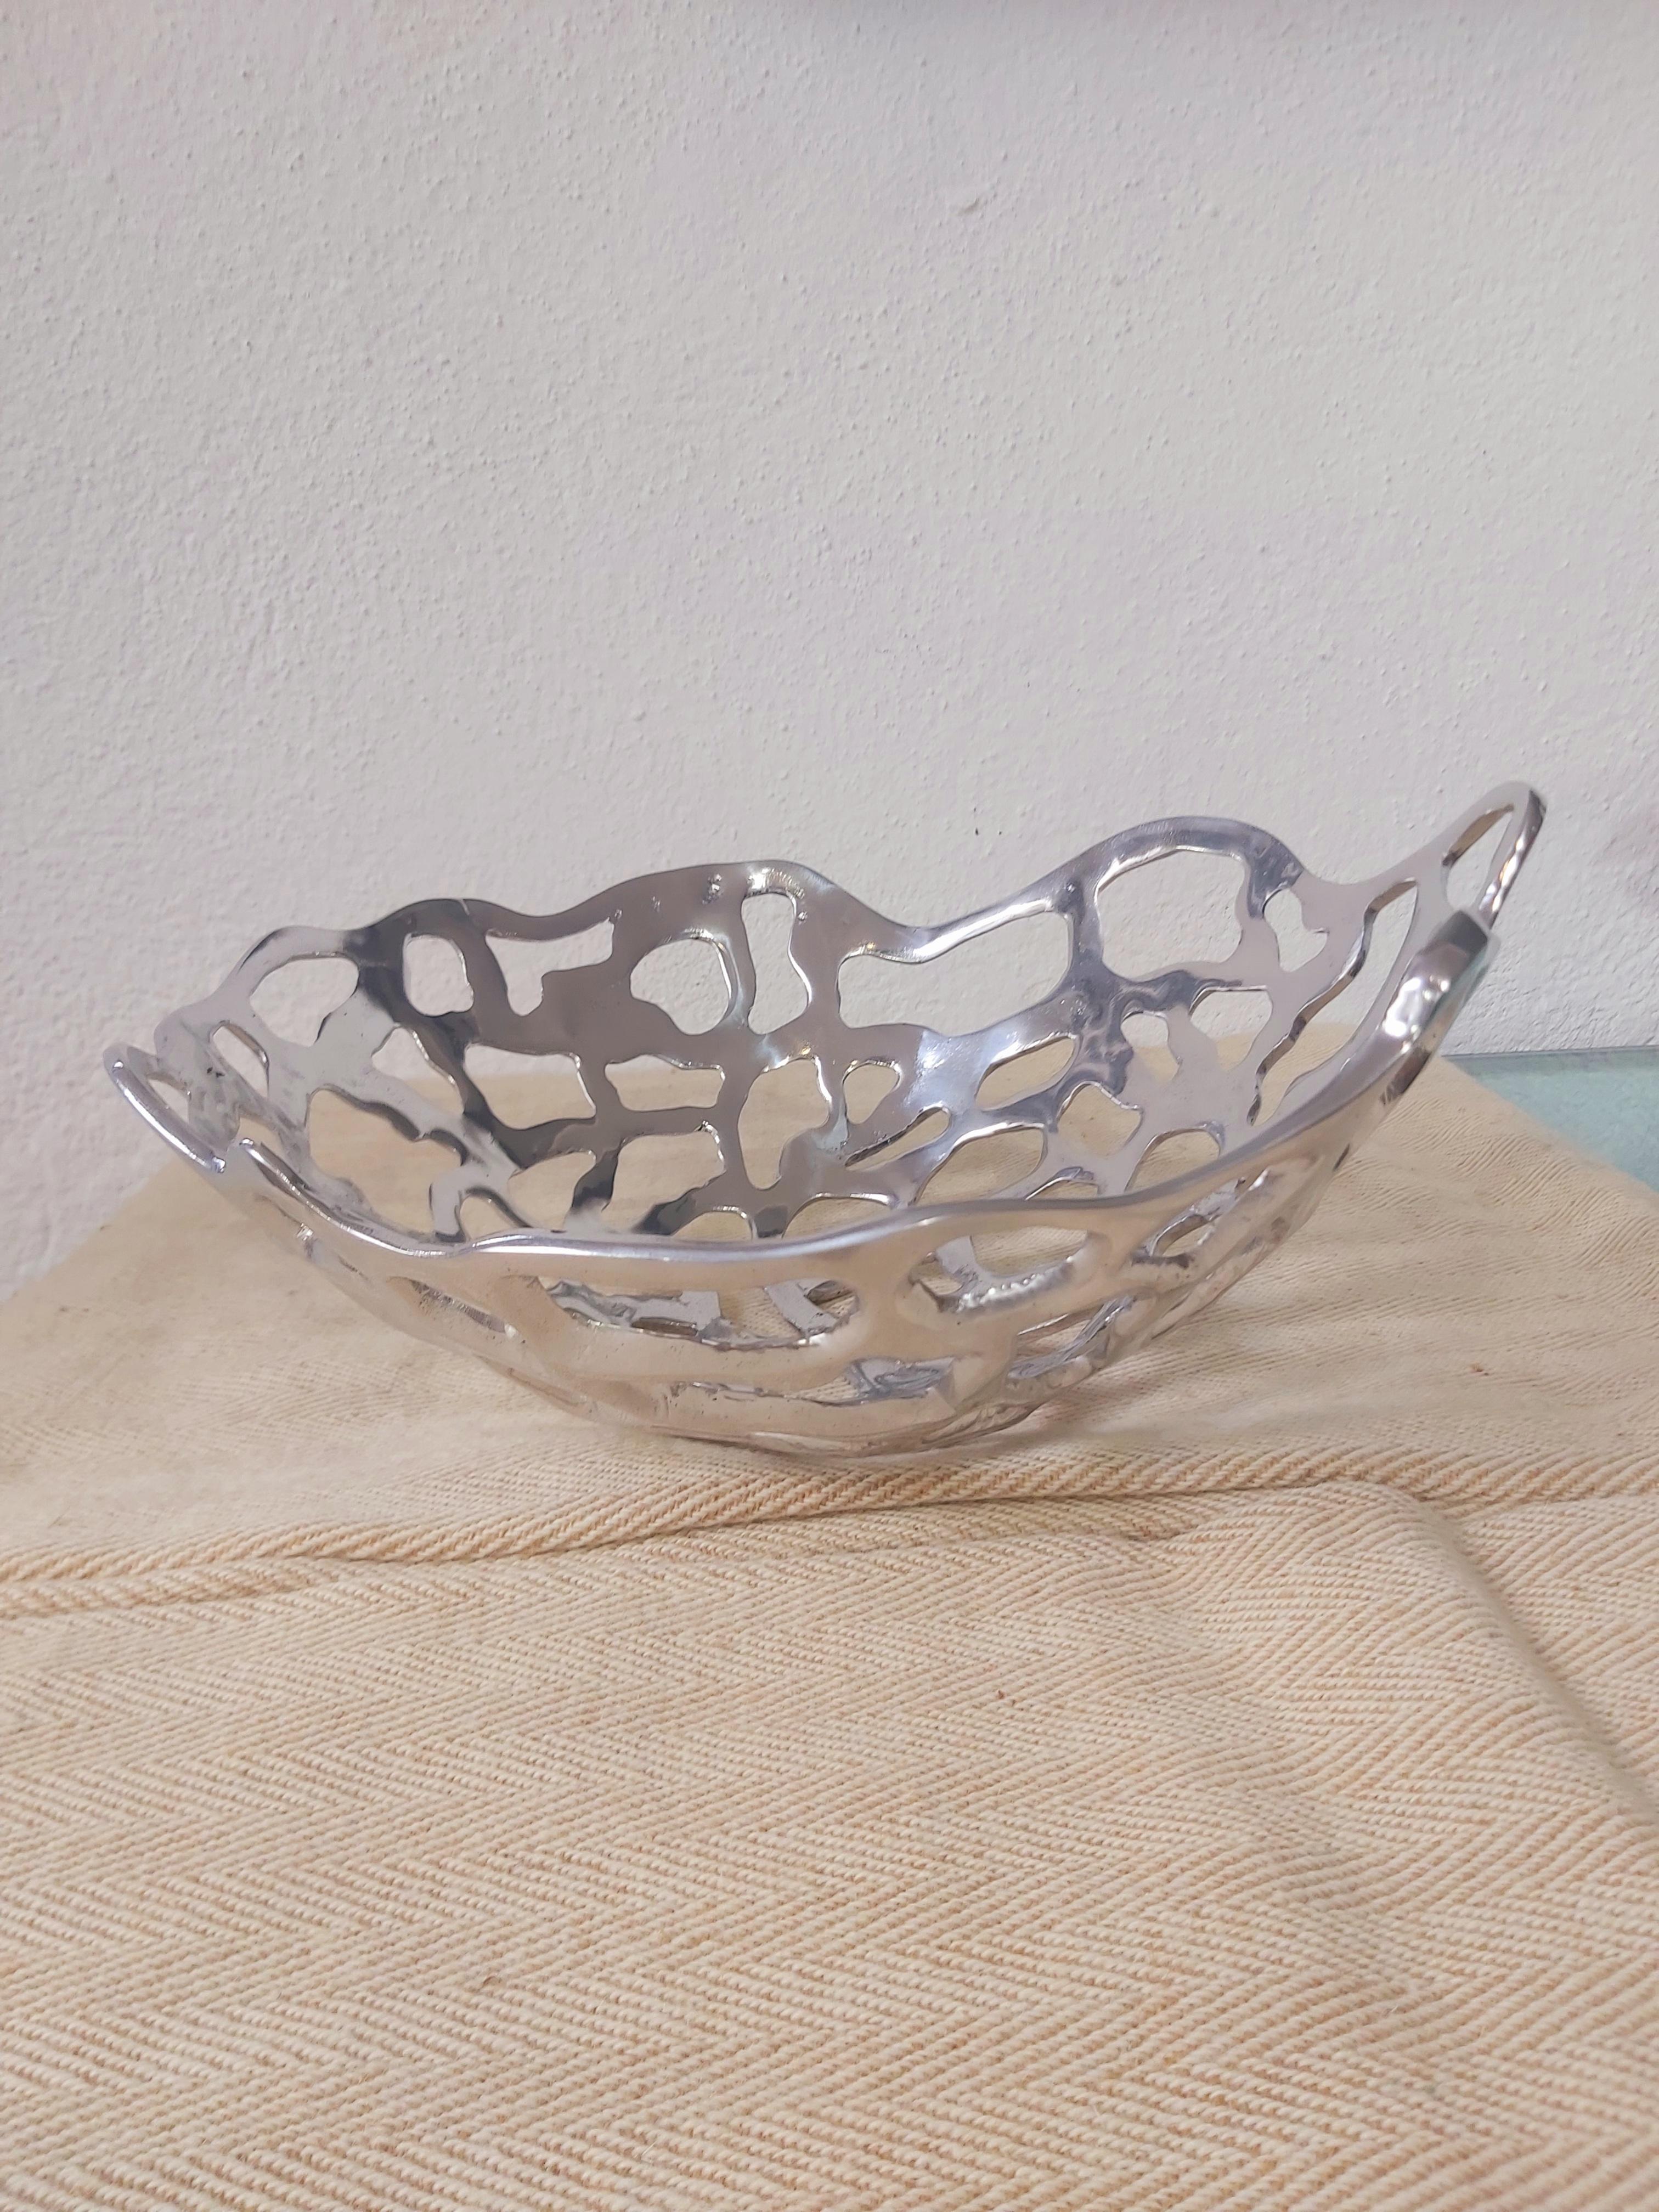 Decorative Object Abstract Metal Mesh Fruit Bowl Handmade in Spain Aluminium  For Sale 5